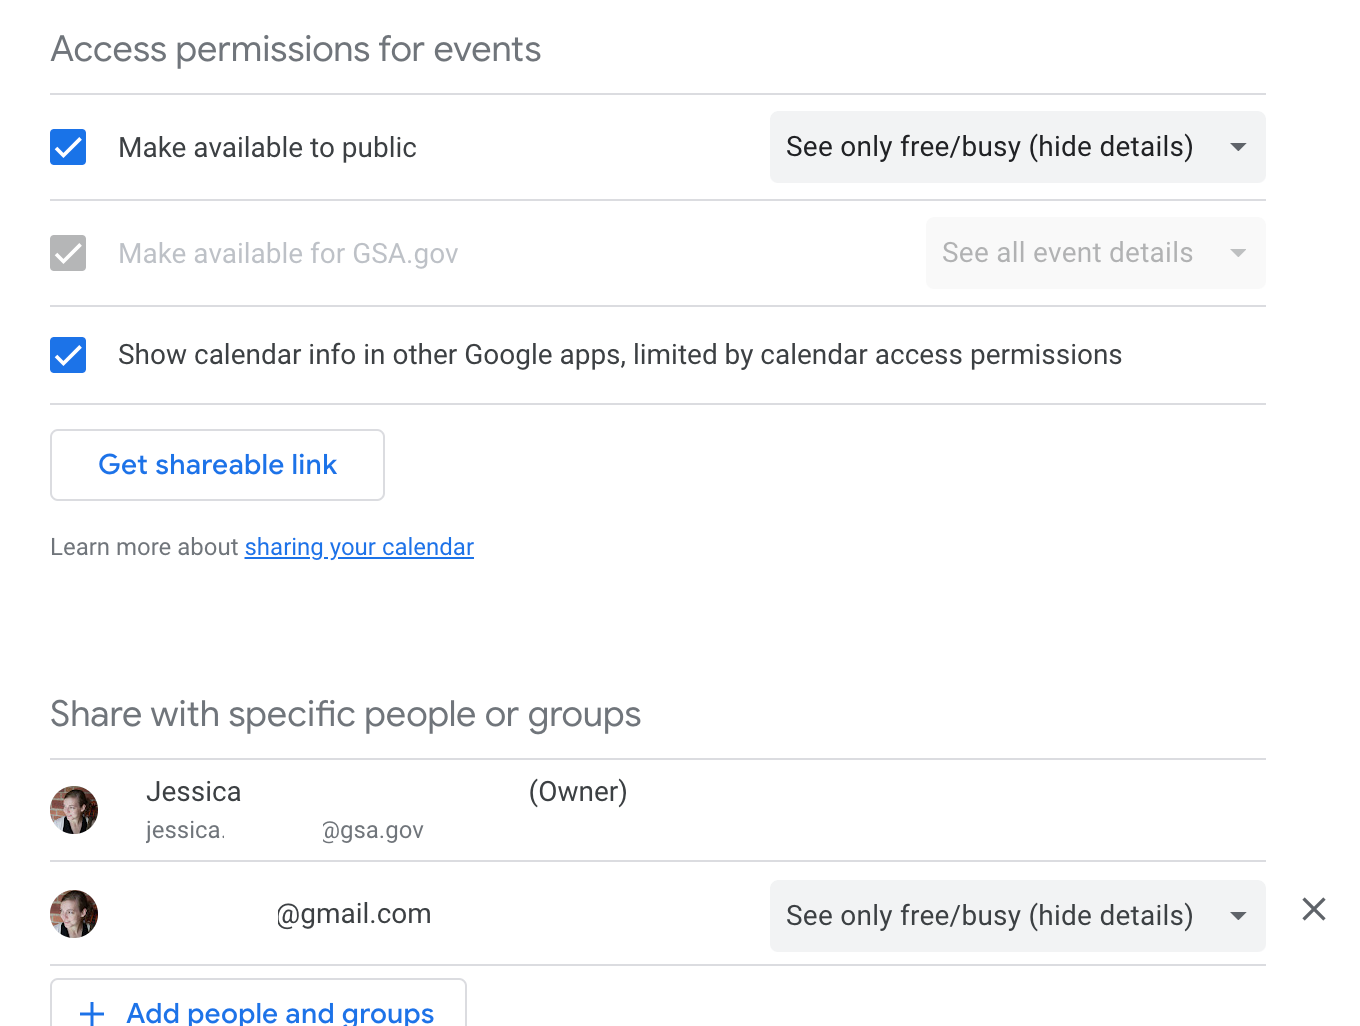 screenshot of calendar settings sections for access permissions for events and share with specific people or groups